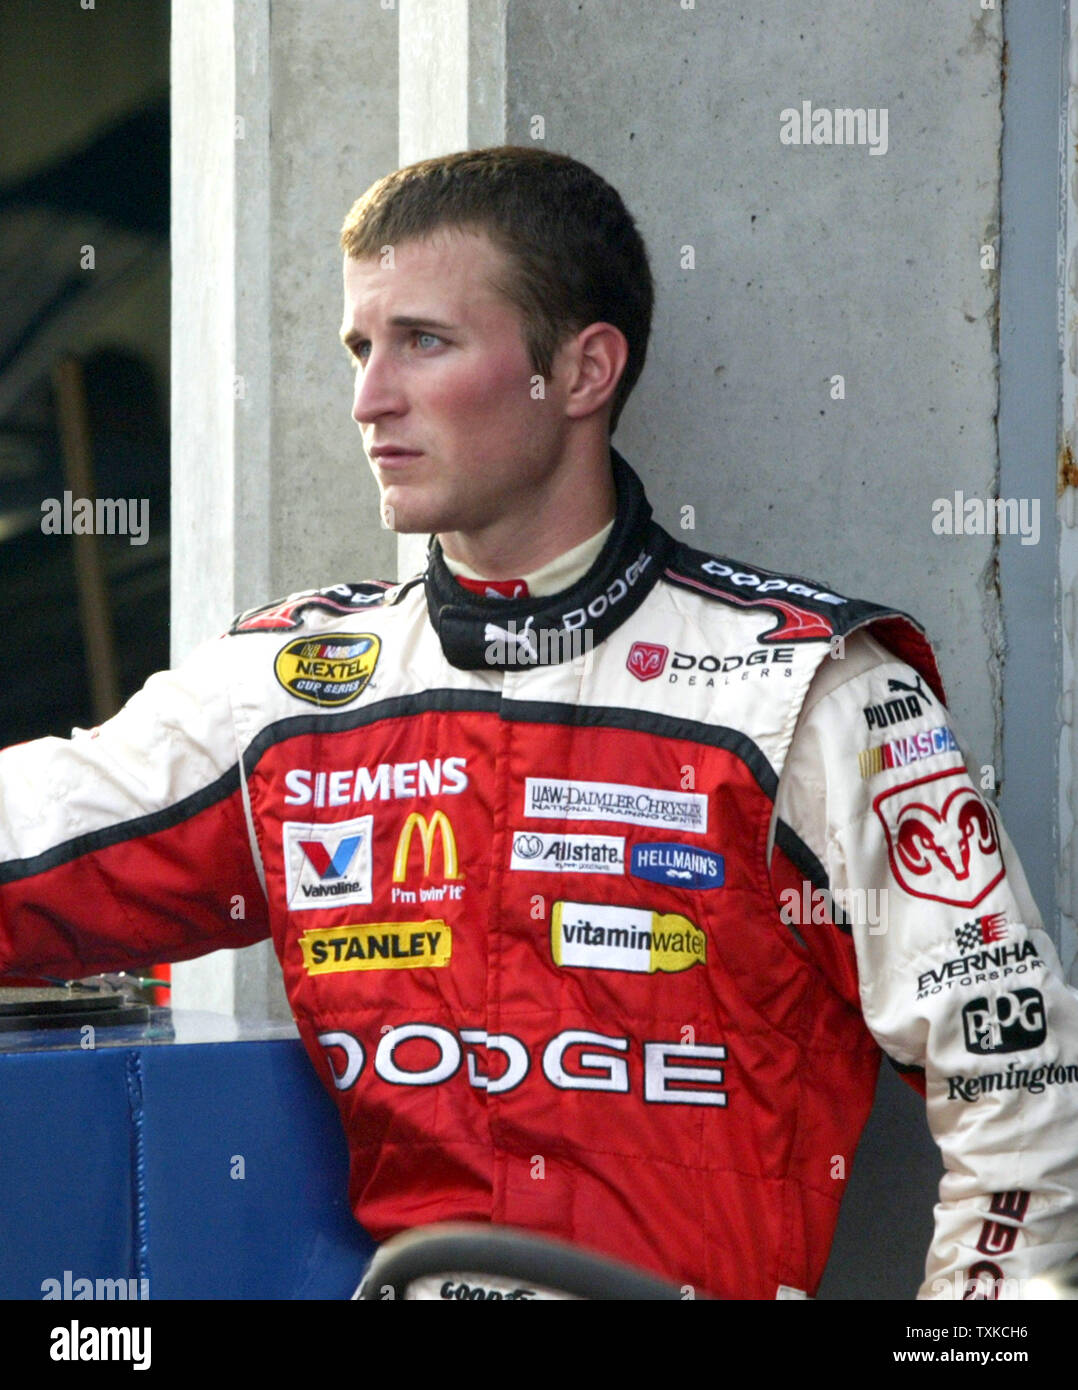 NASCAR driver Kasey Kahne stands in his garage stall during Nextel Cup practice for the Coca-Cola 600 at the Lowe's Motor Speedway in Charlotte, N.C., on May 27, 2006. (UPI Photo/Nell Redmond) Stock Photo